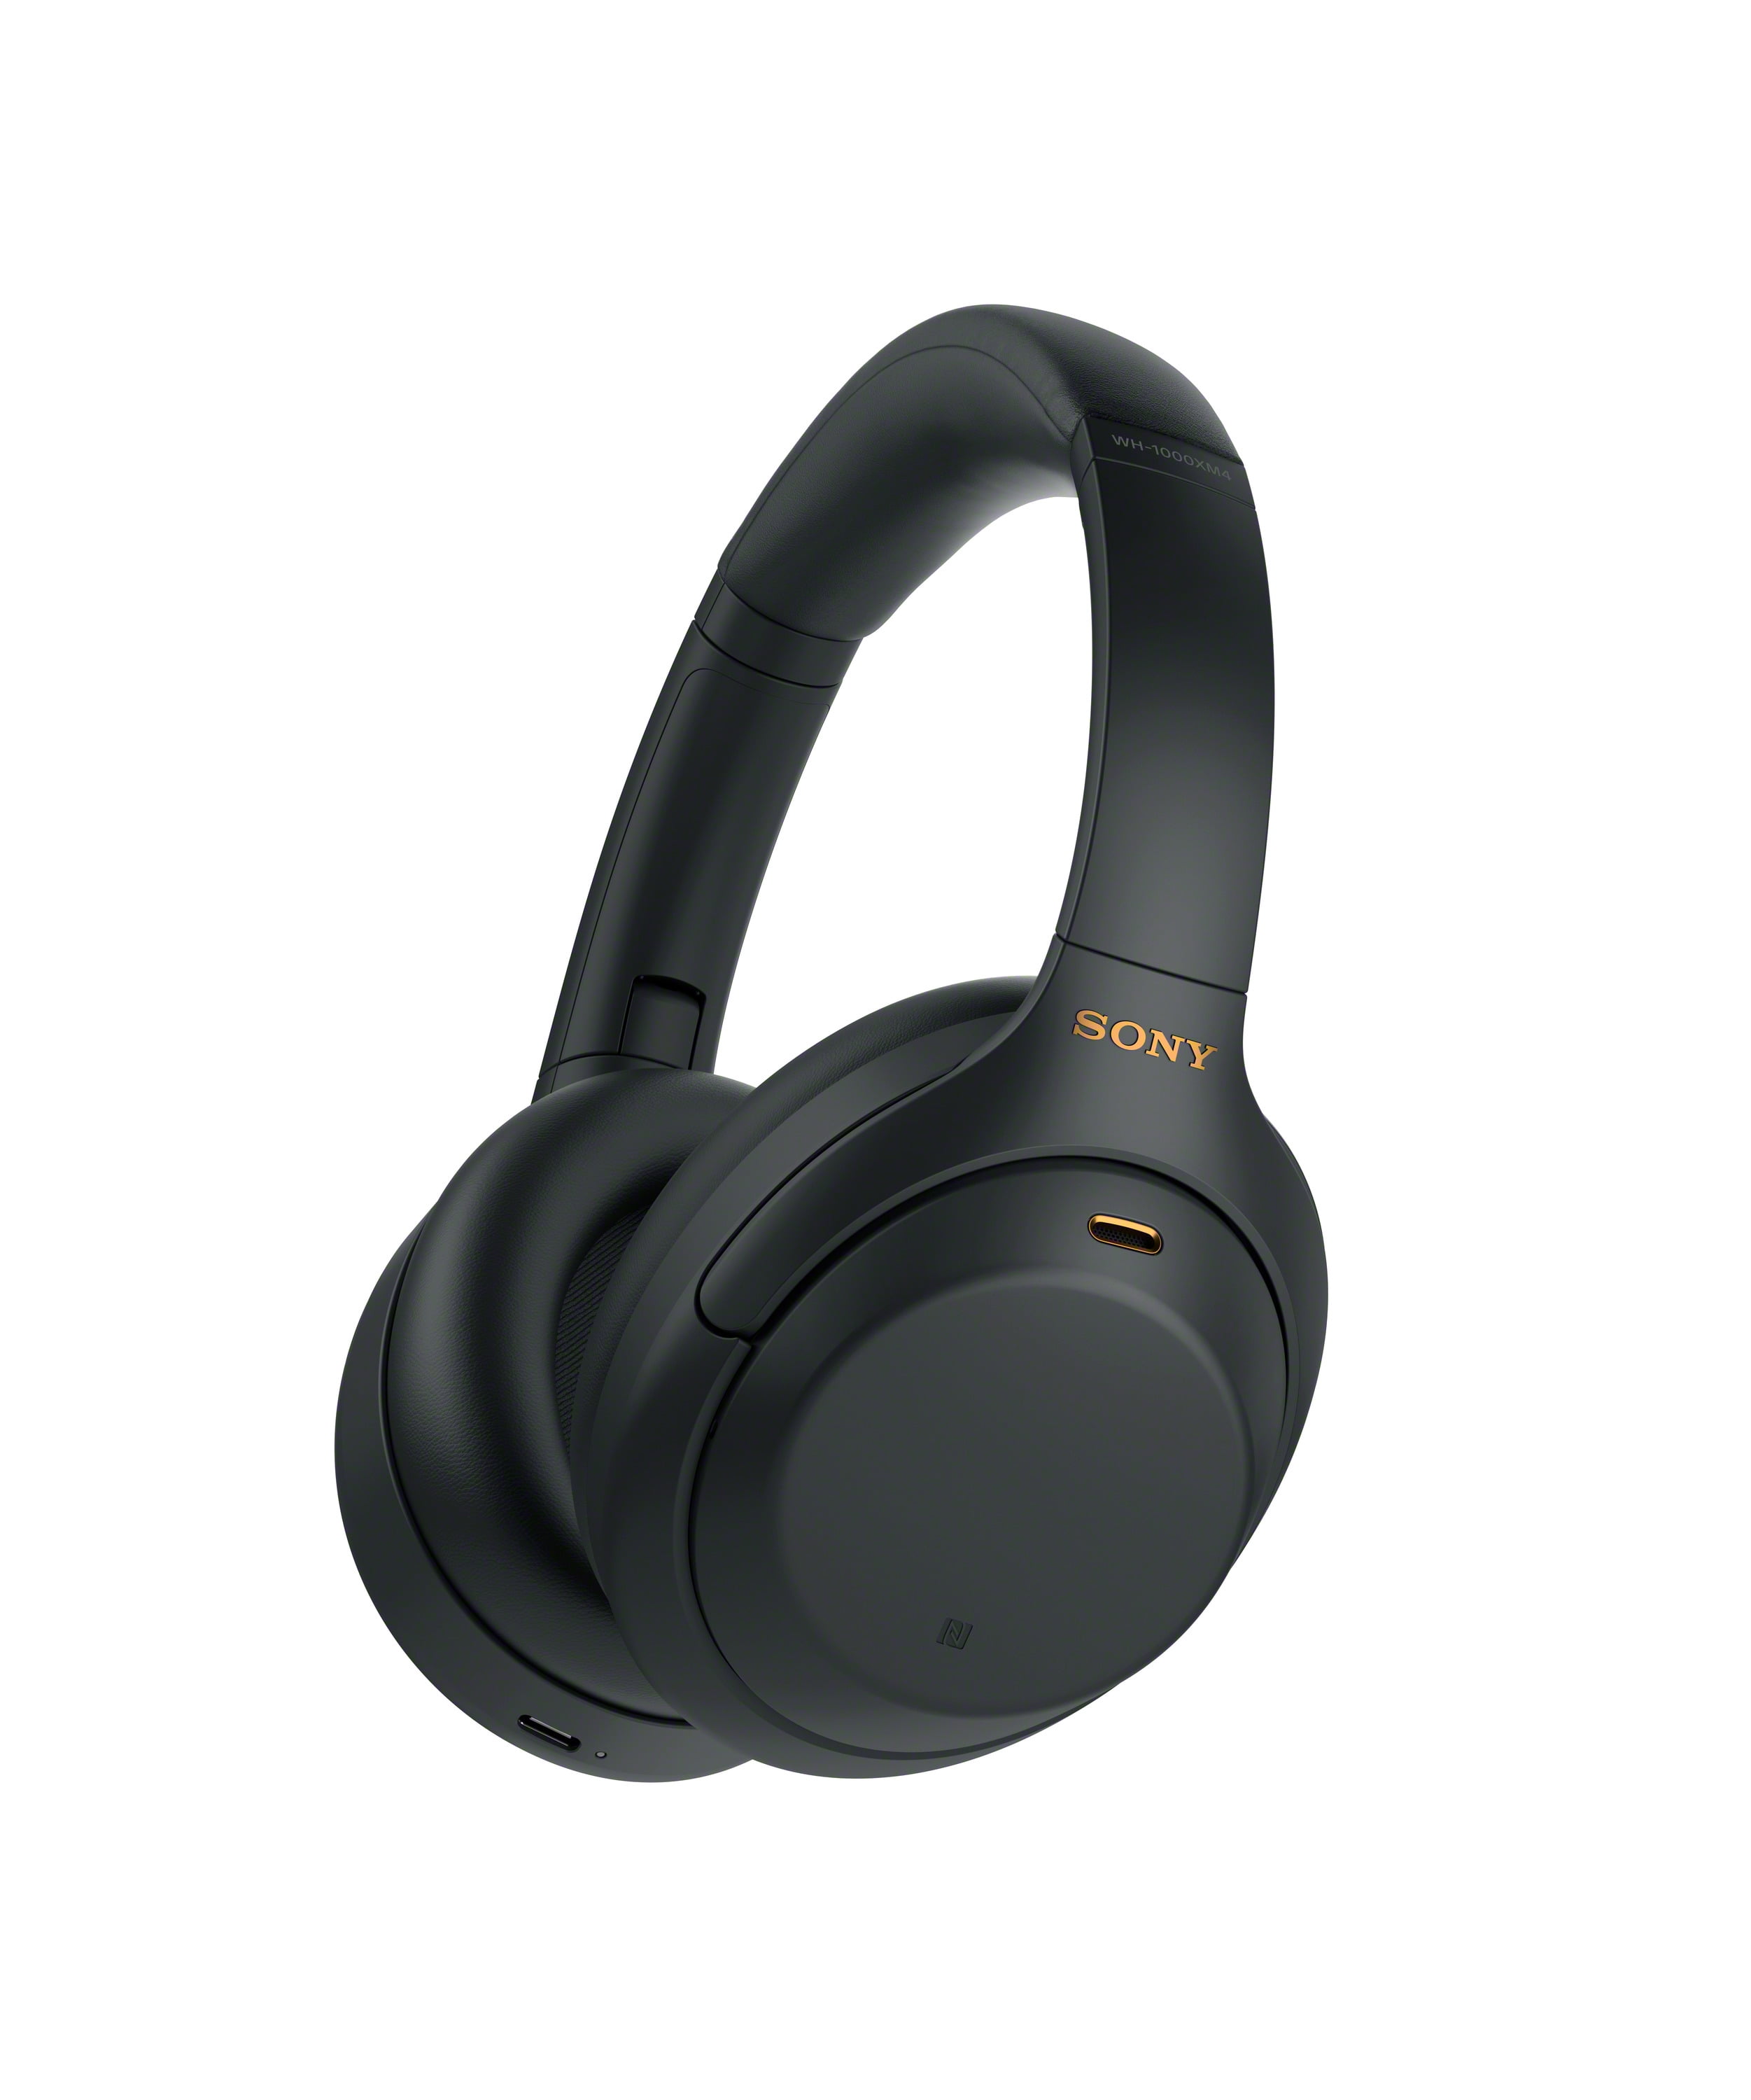 Sony WH-1000XM4 Wireless Noise Canceling Over-the-Ear Headphones ...